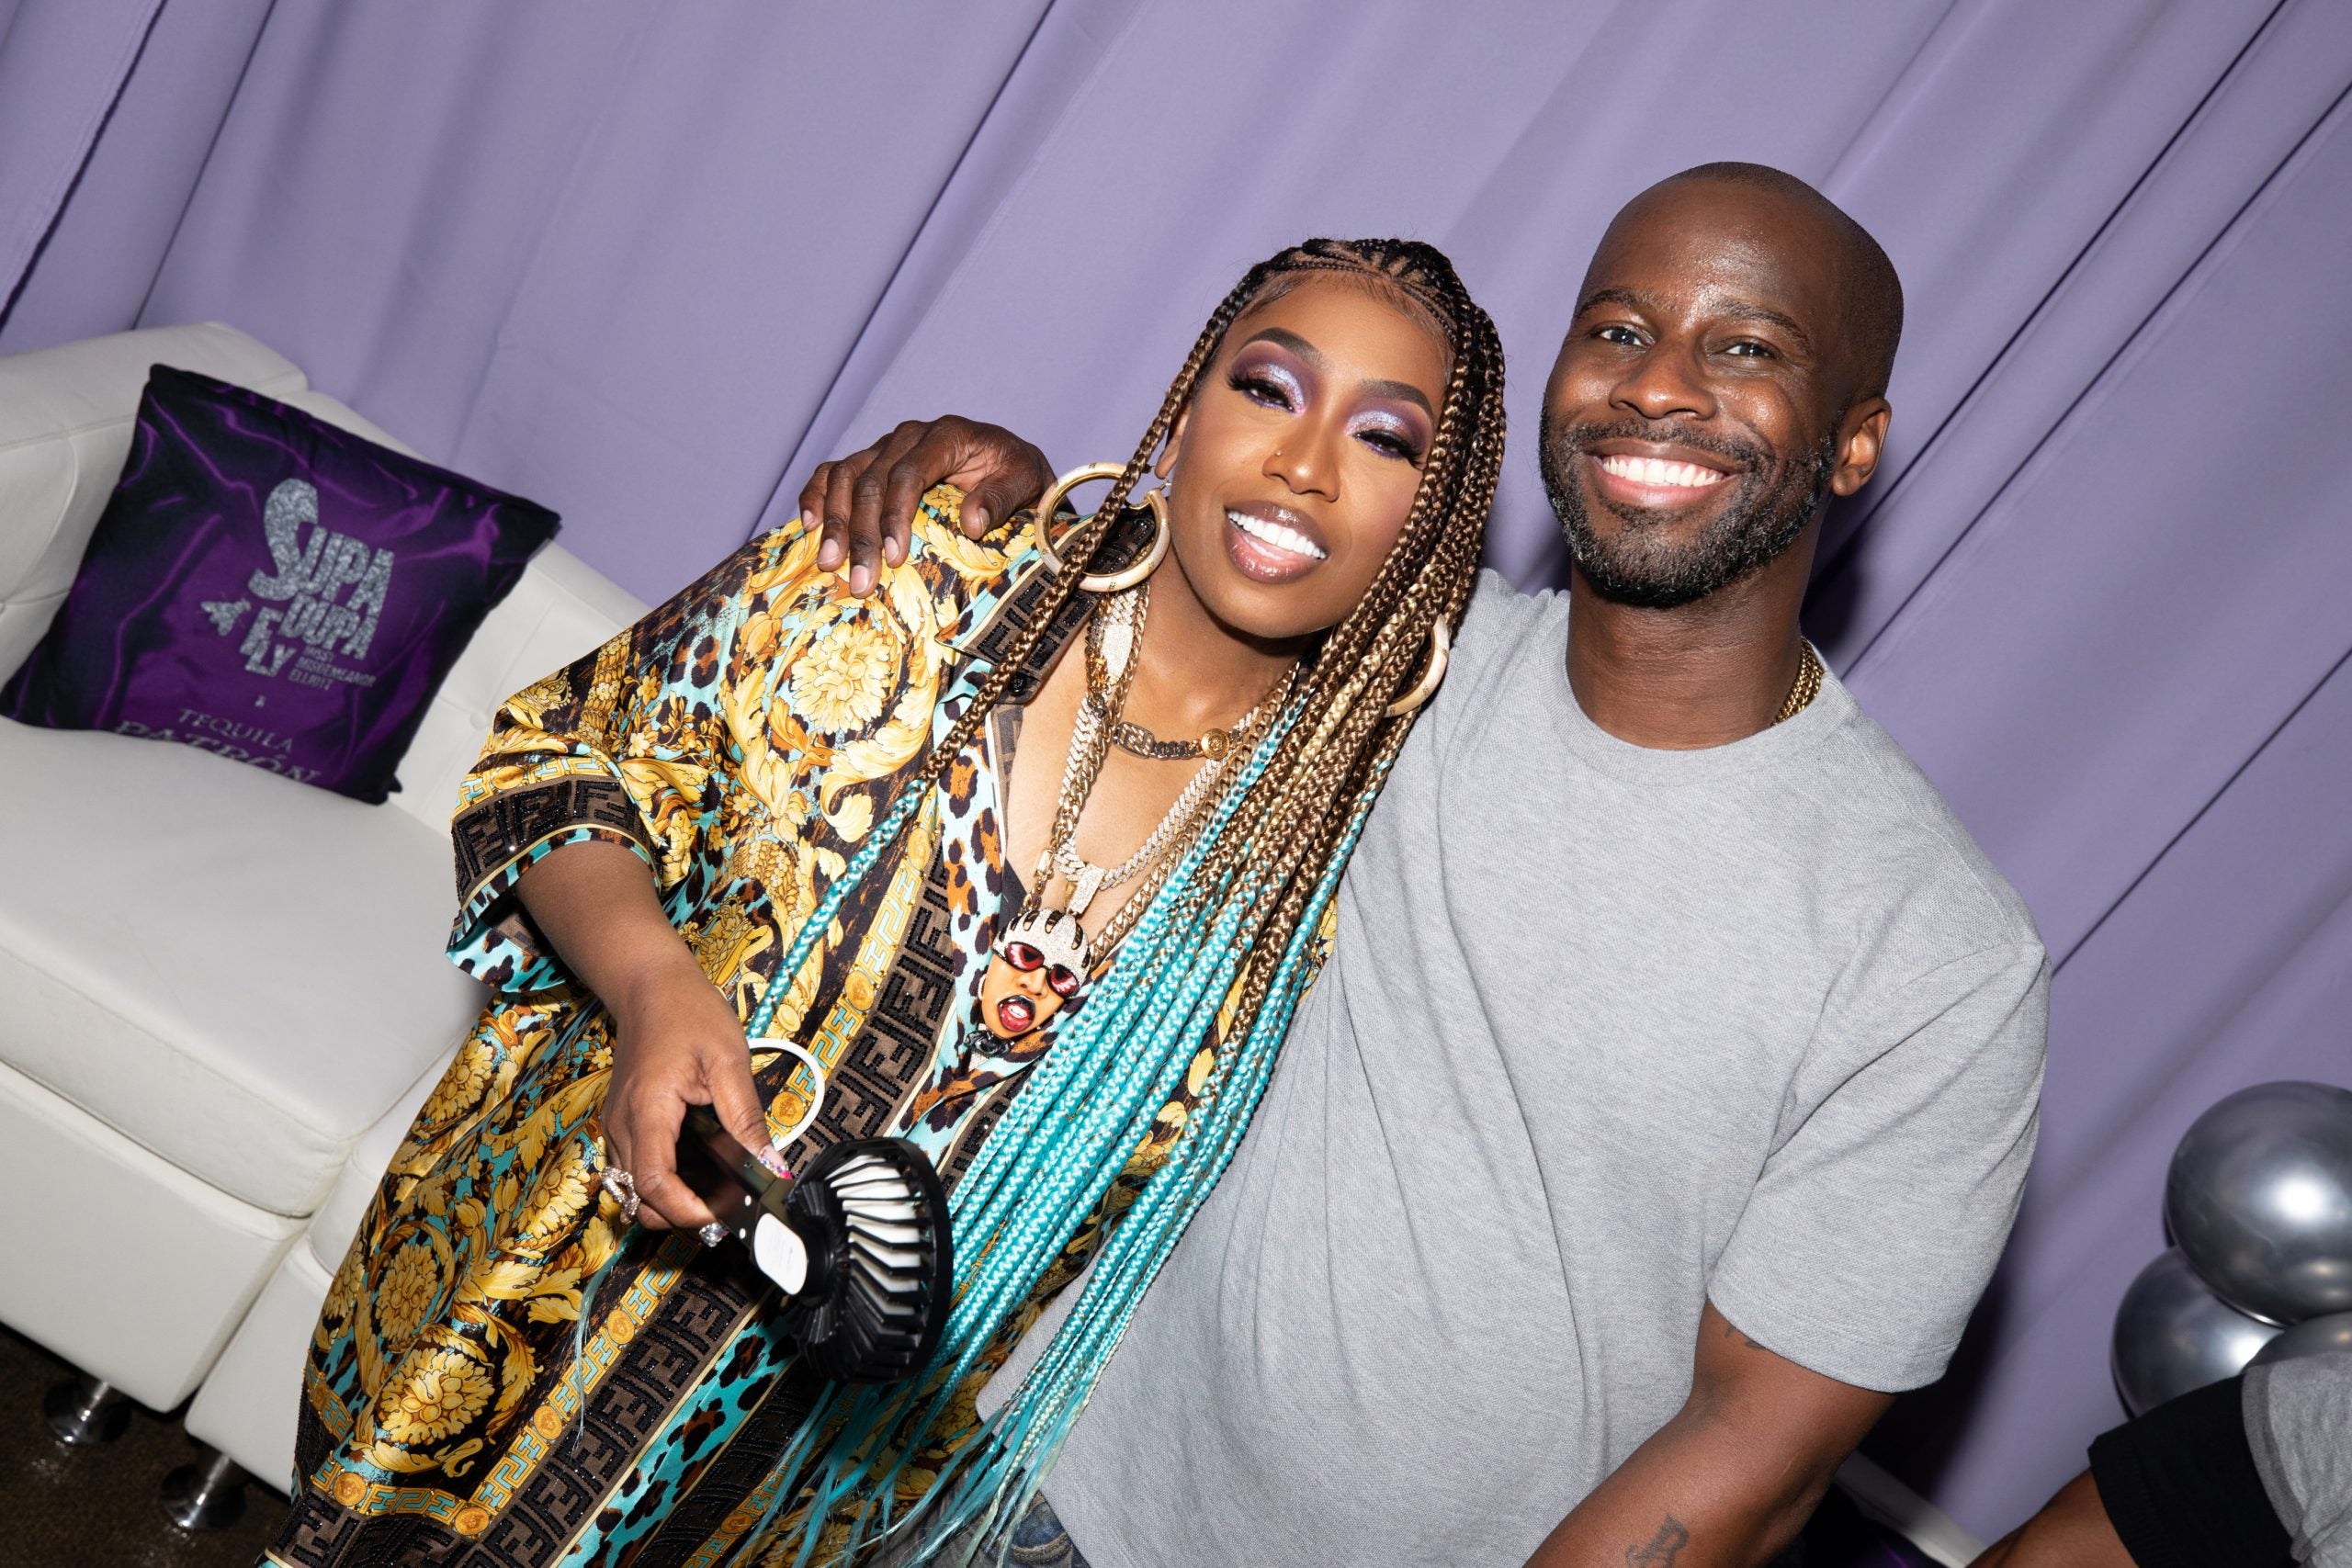 The Iconic Missy Elliott Honored With An Amazing Birthday Bash To Celebrate 25th Anniversary Of ‘Supa Dupa Fly’